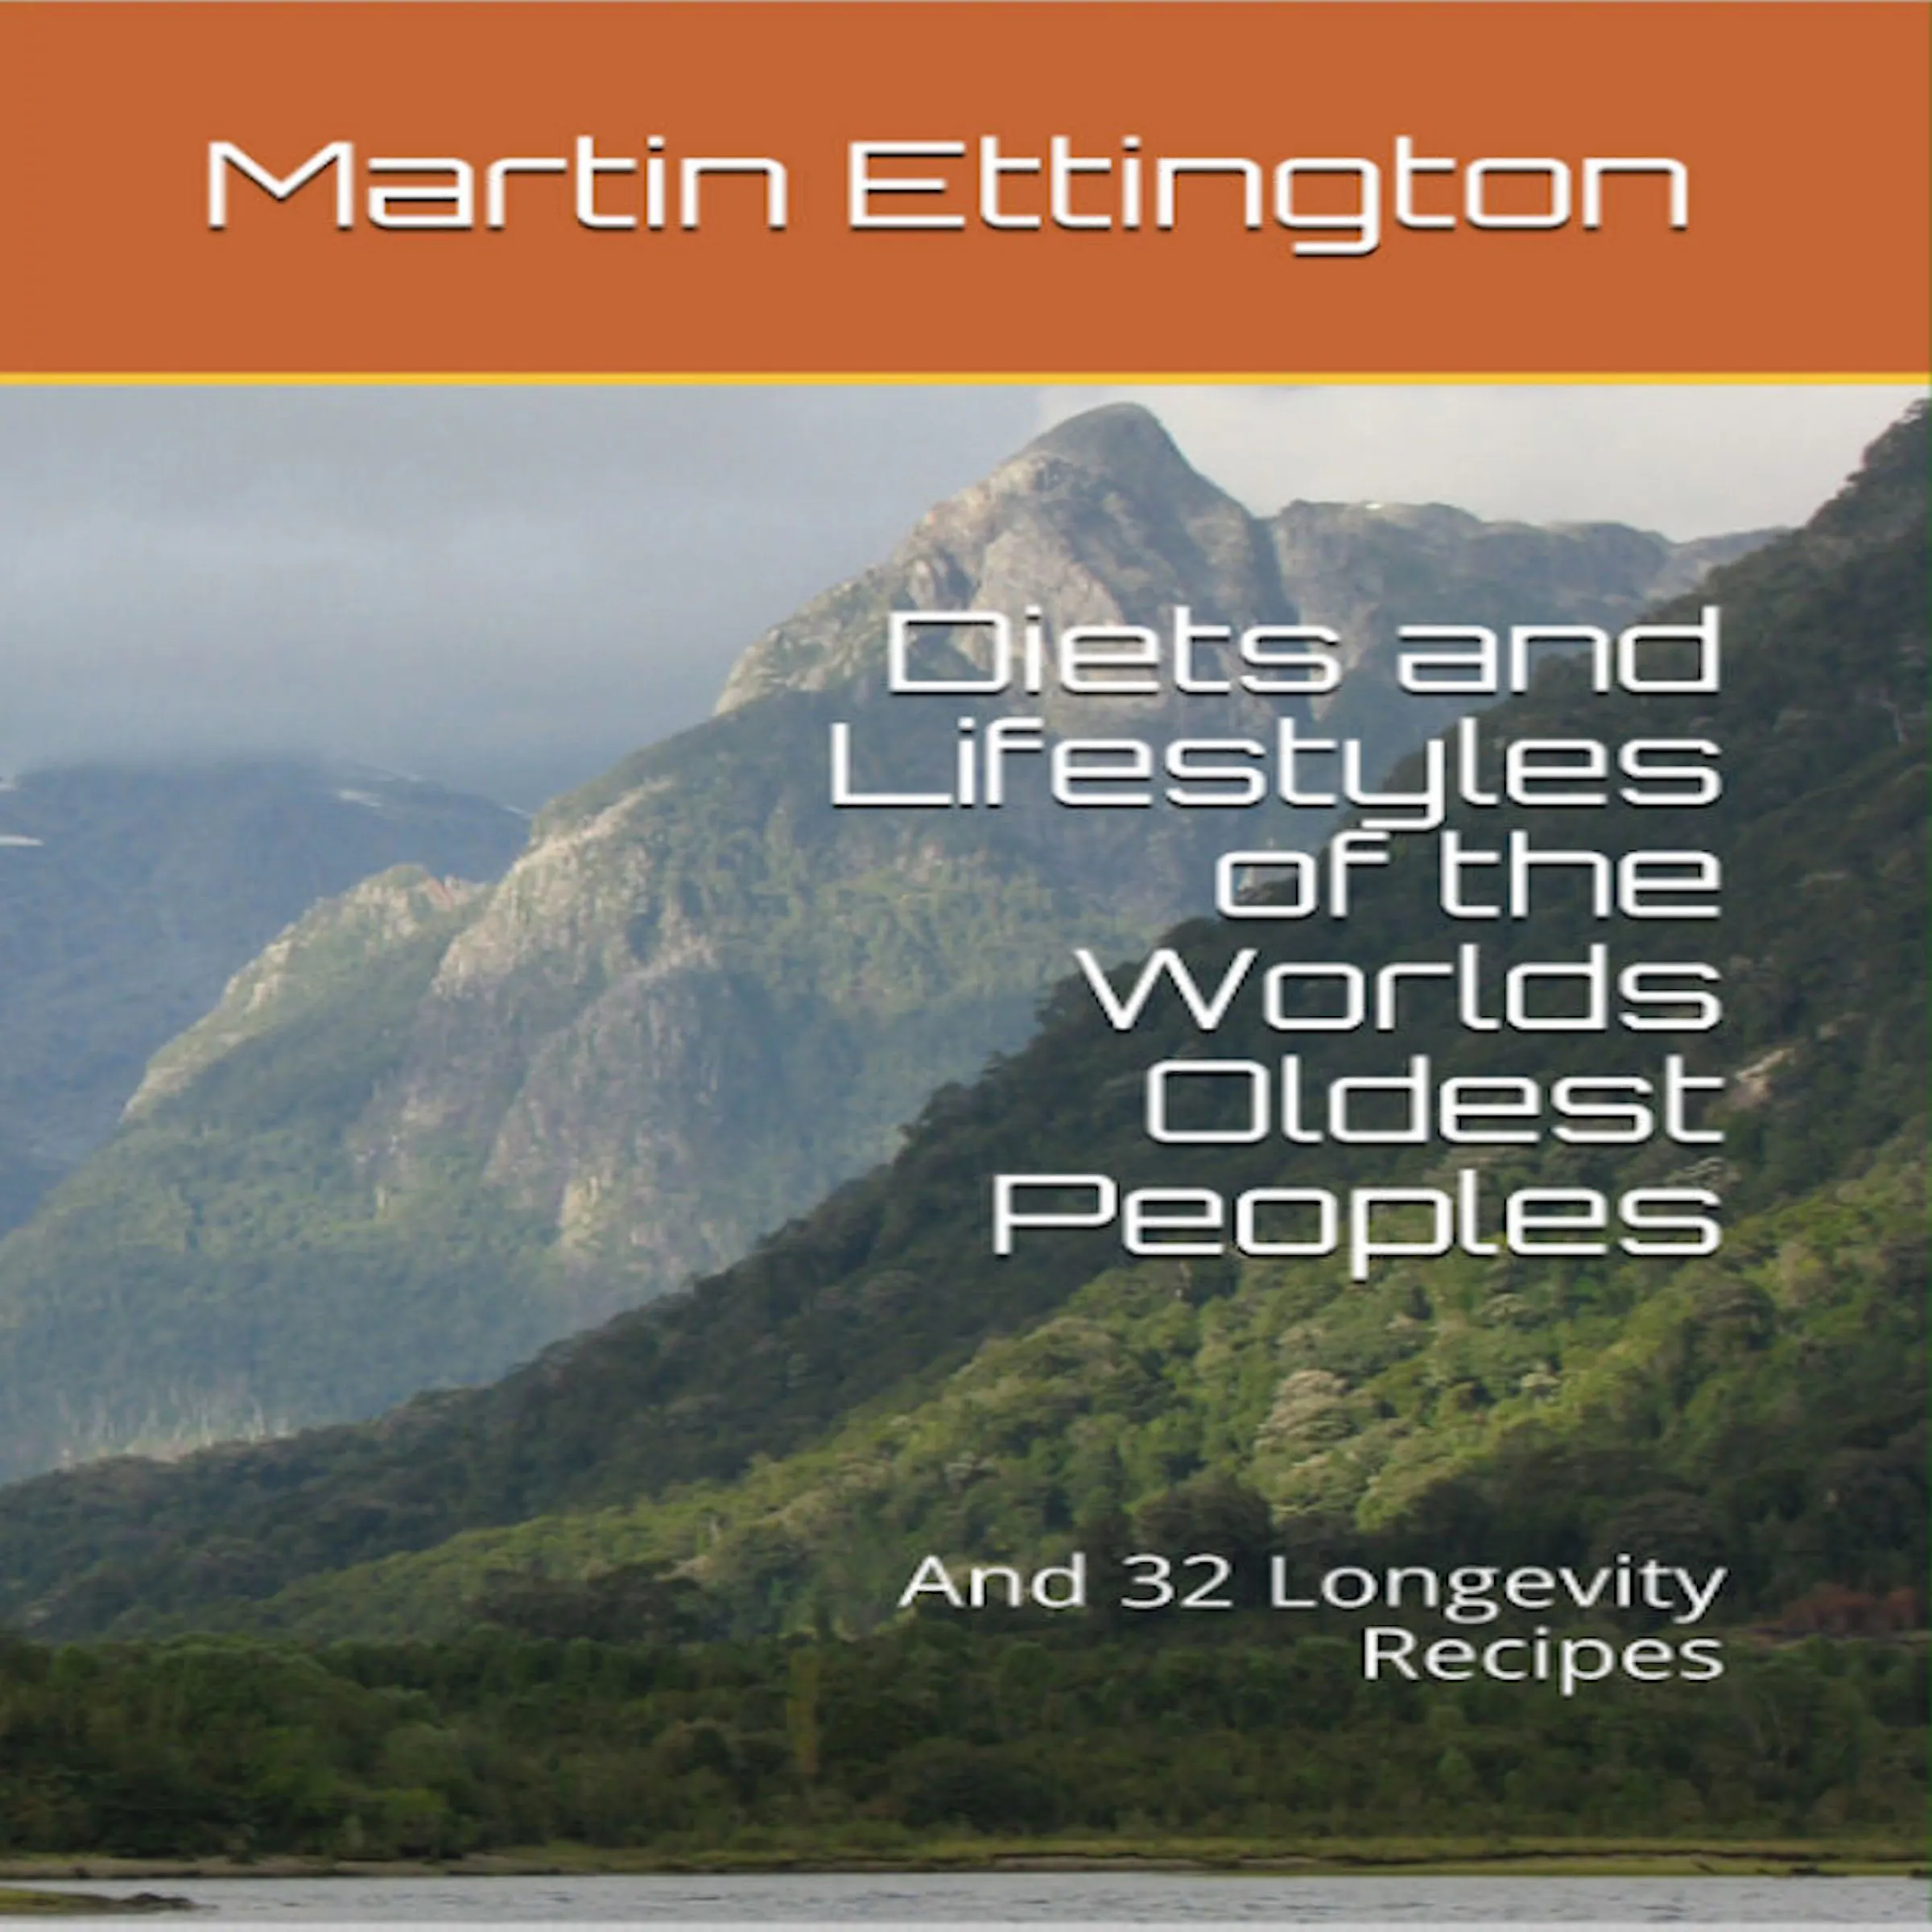 Diets and Lifestyles of the World's Oldest Peoples & 32 Longevity Recipes Audiobook by Martin K. Ettington